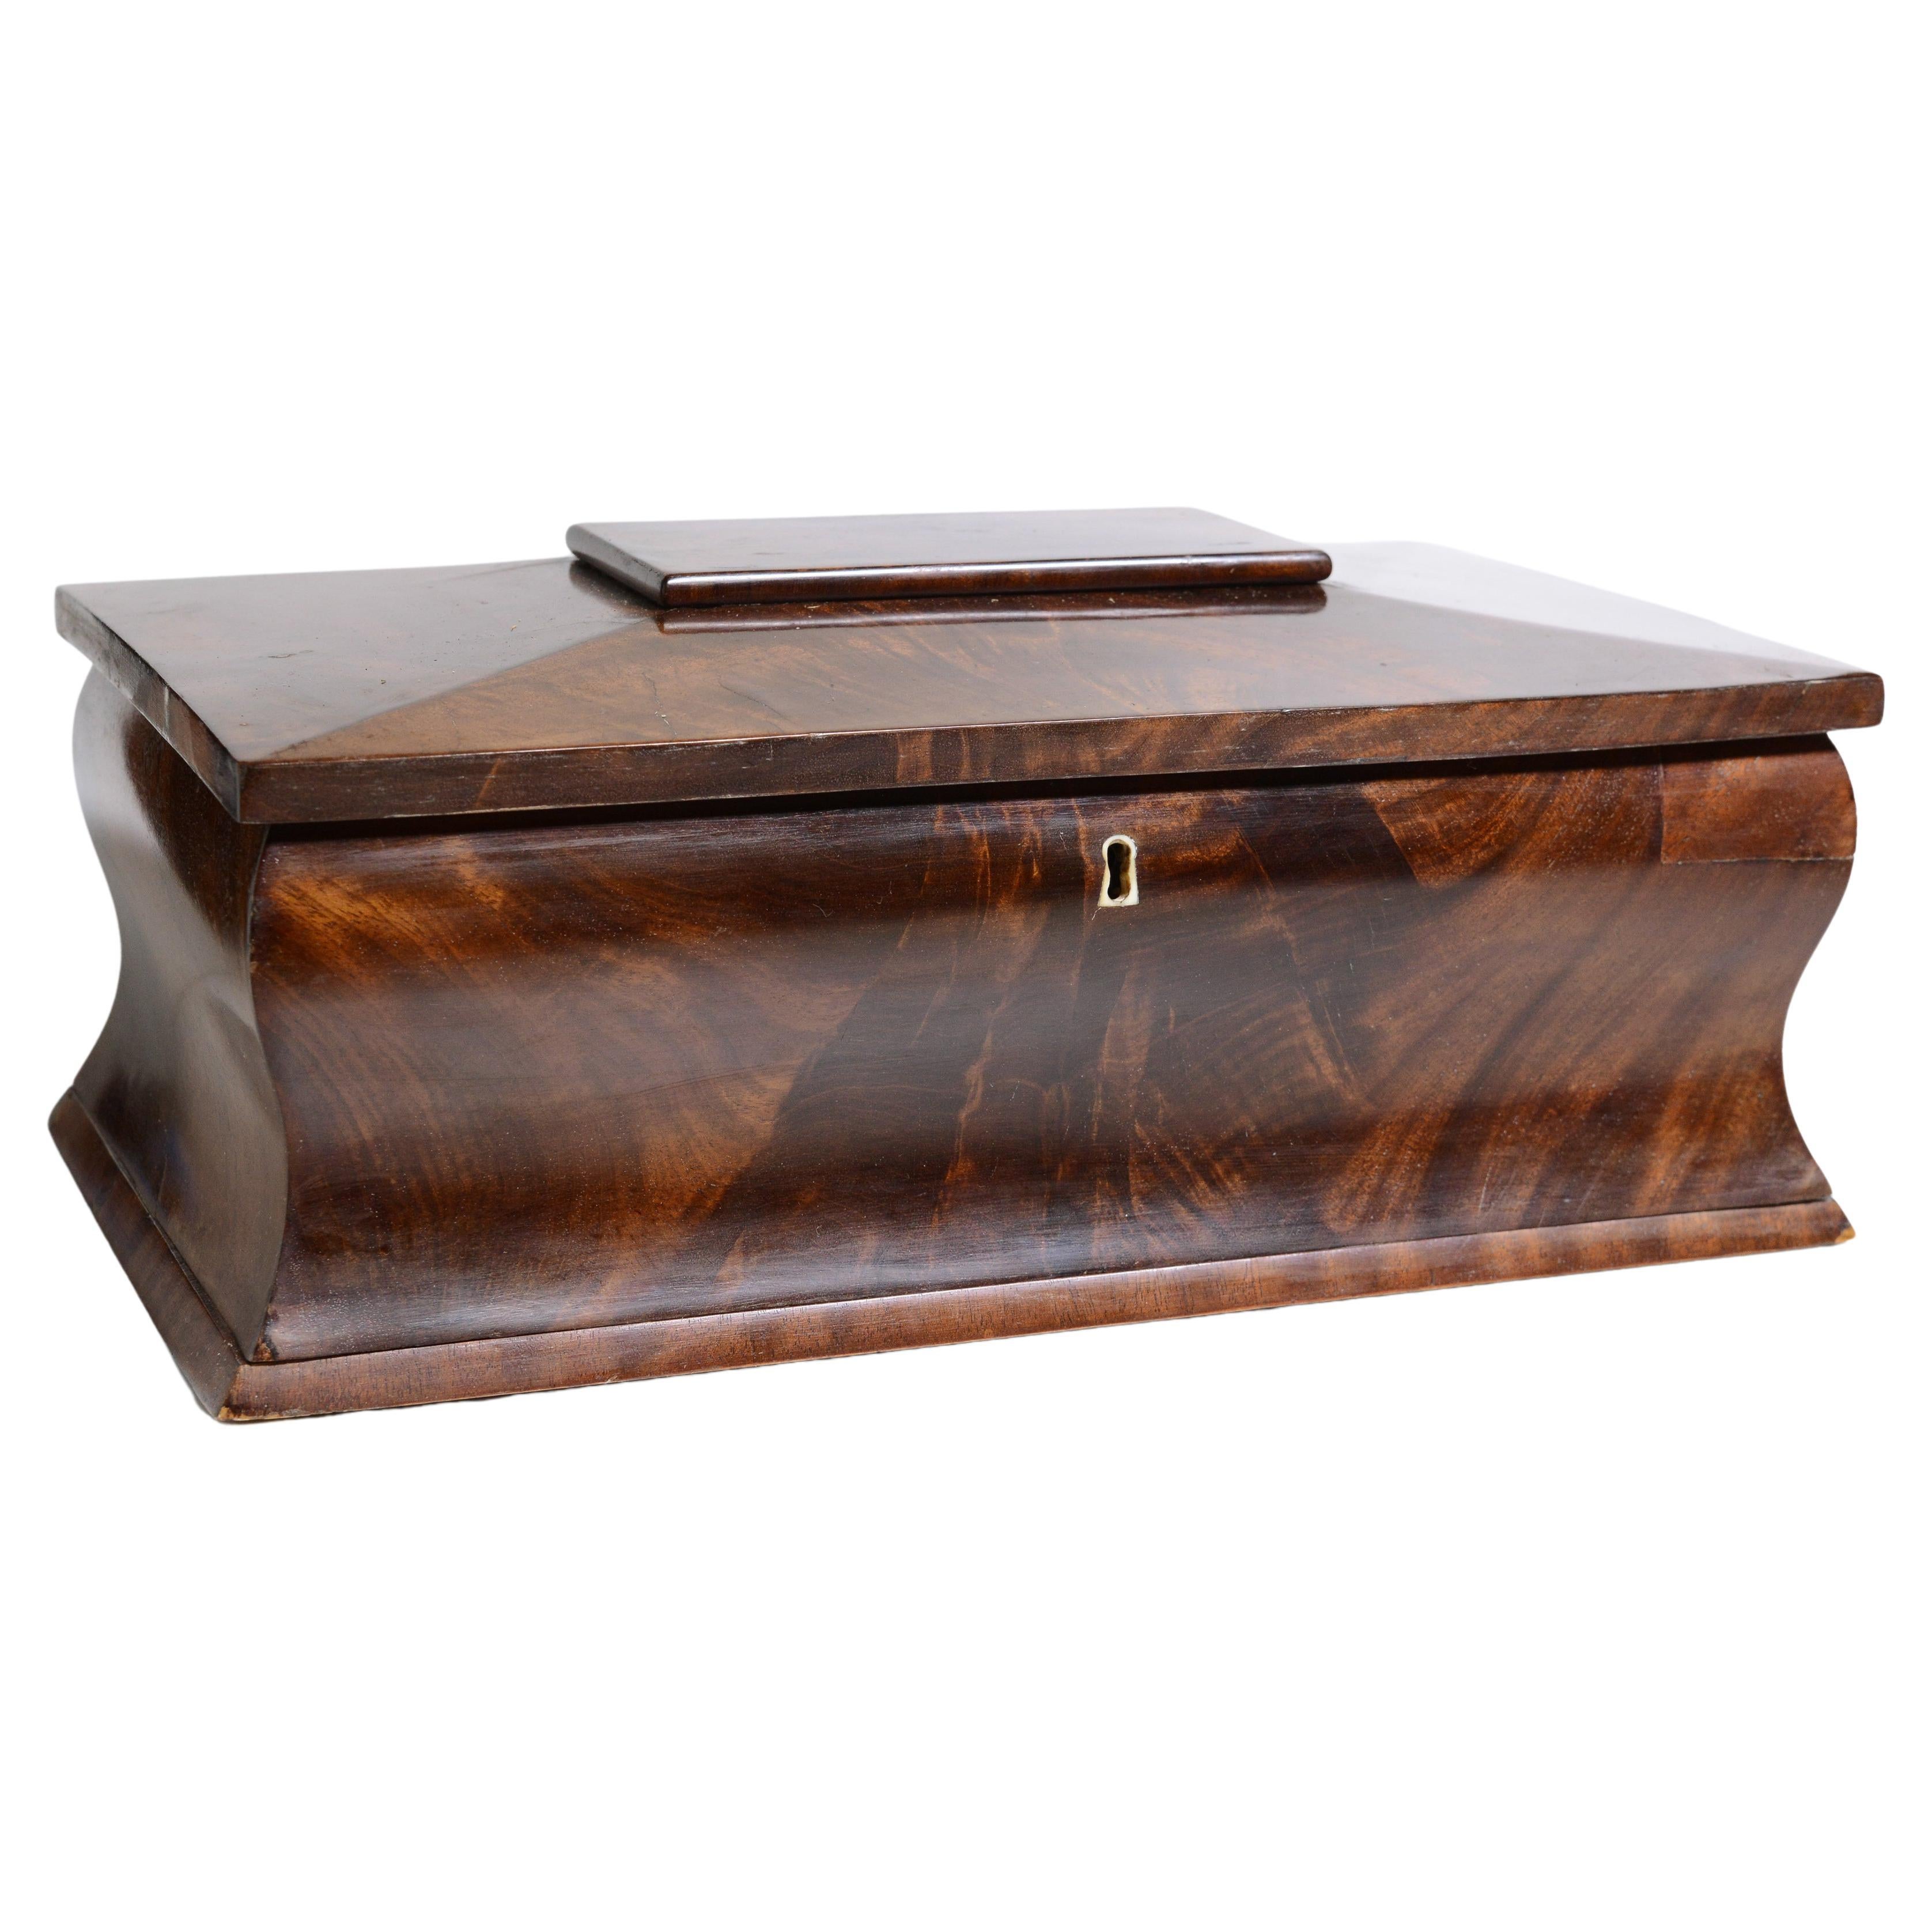 Wooden Casket Box with Mirror mid 19th century Flame Mahogany Biedermeier For Sale